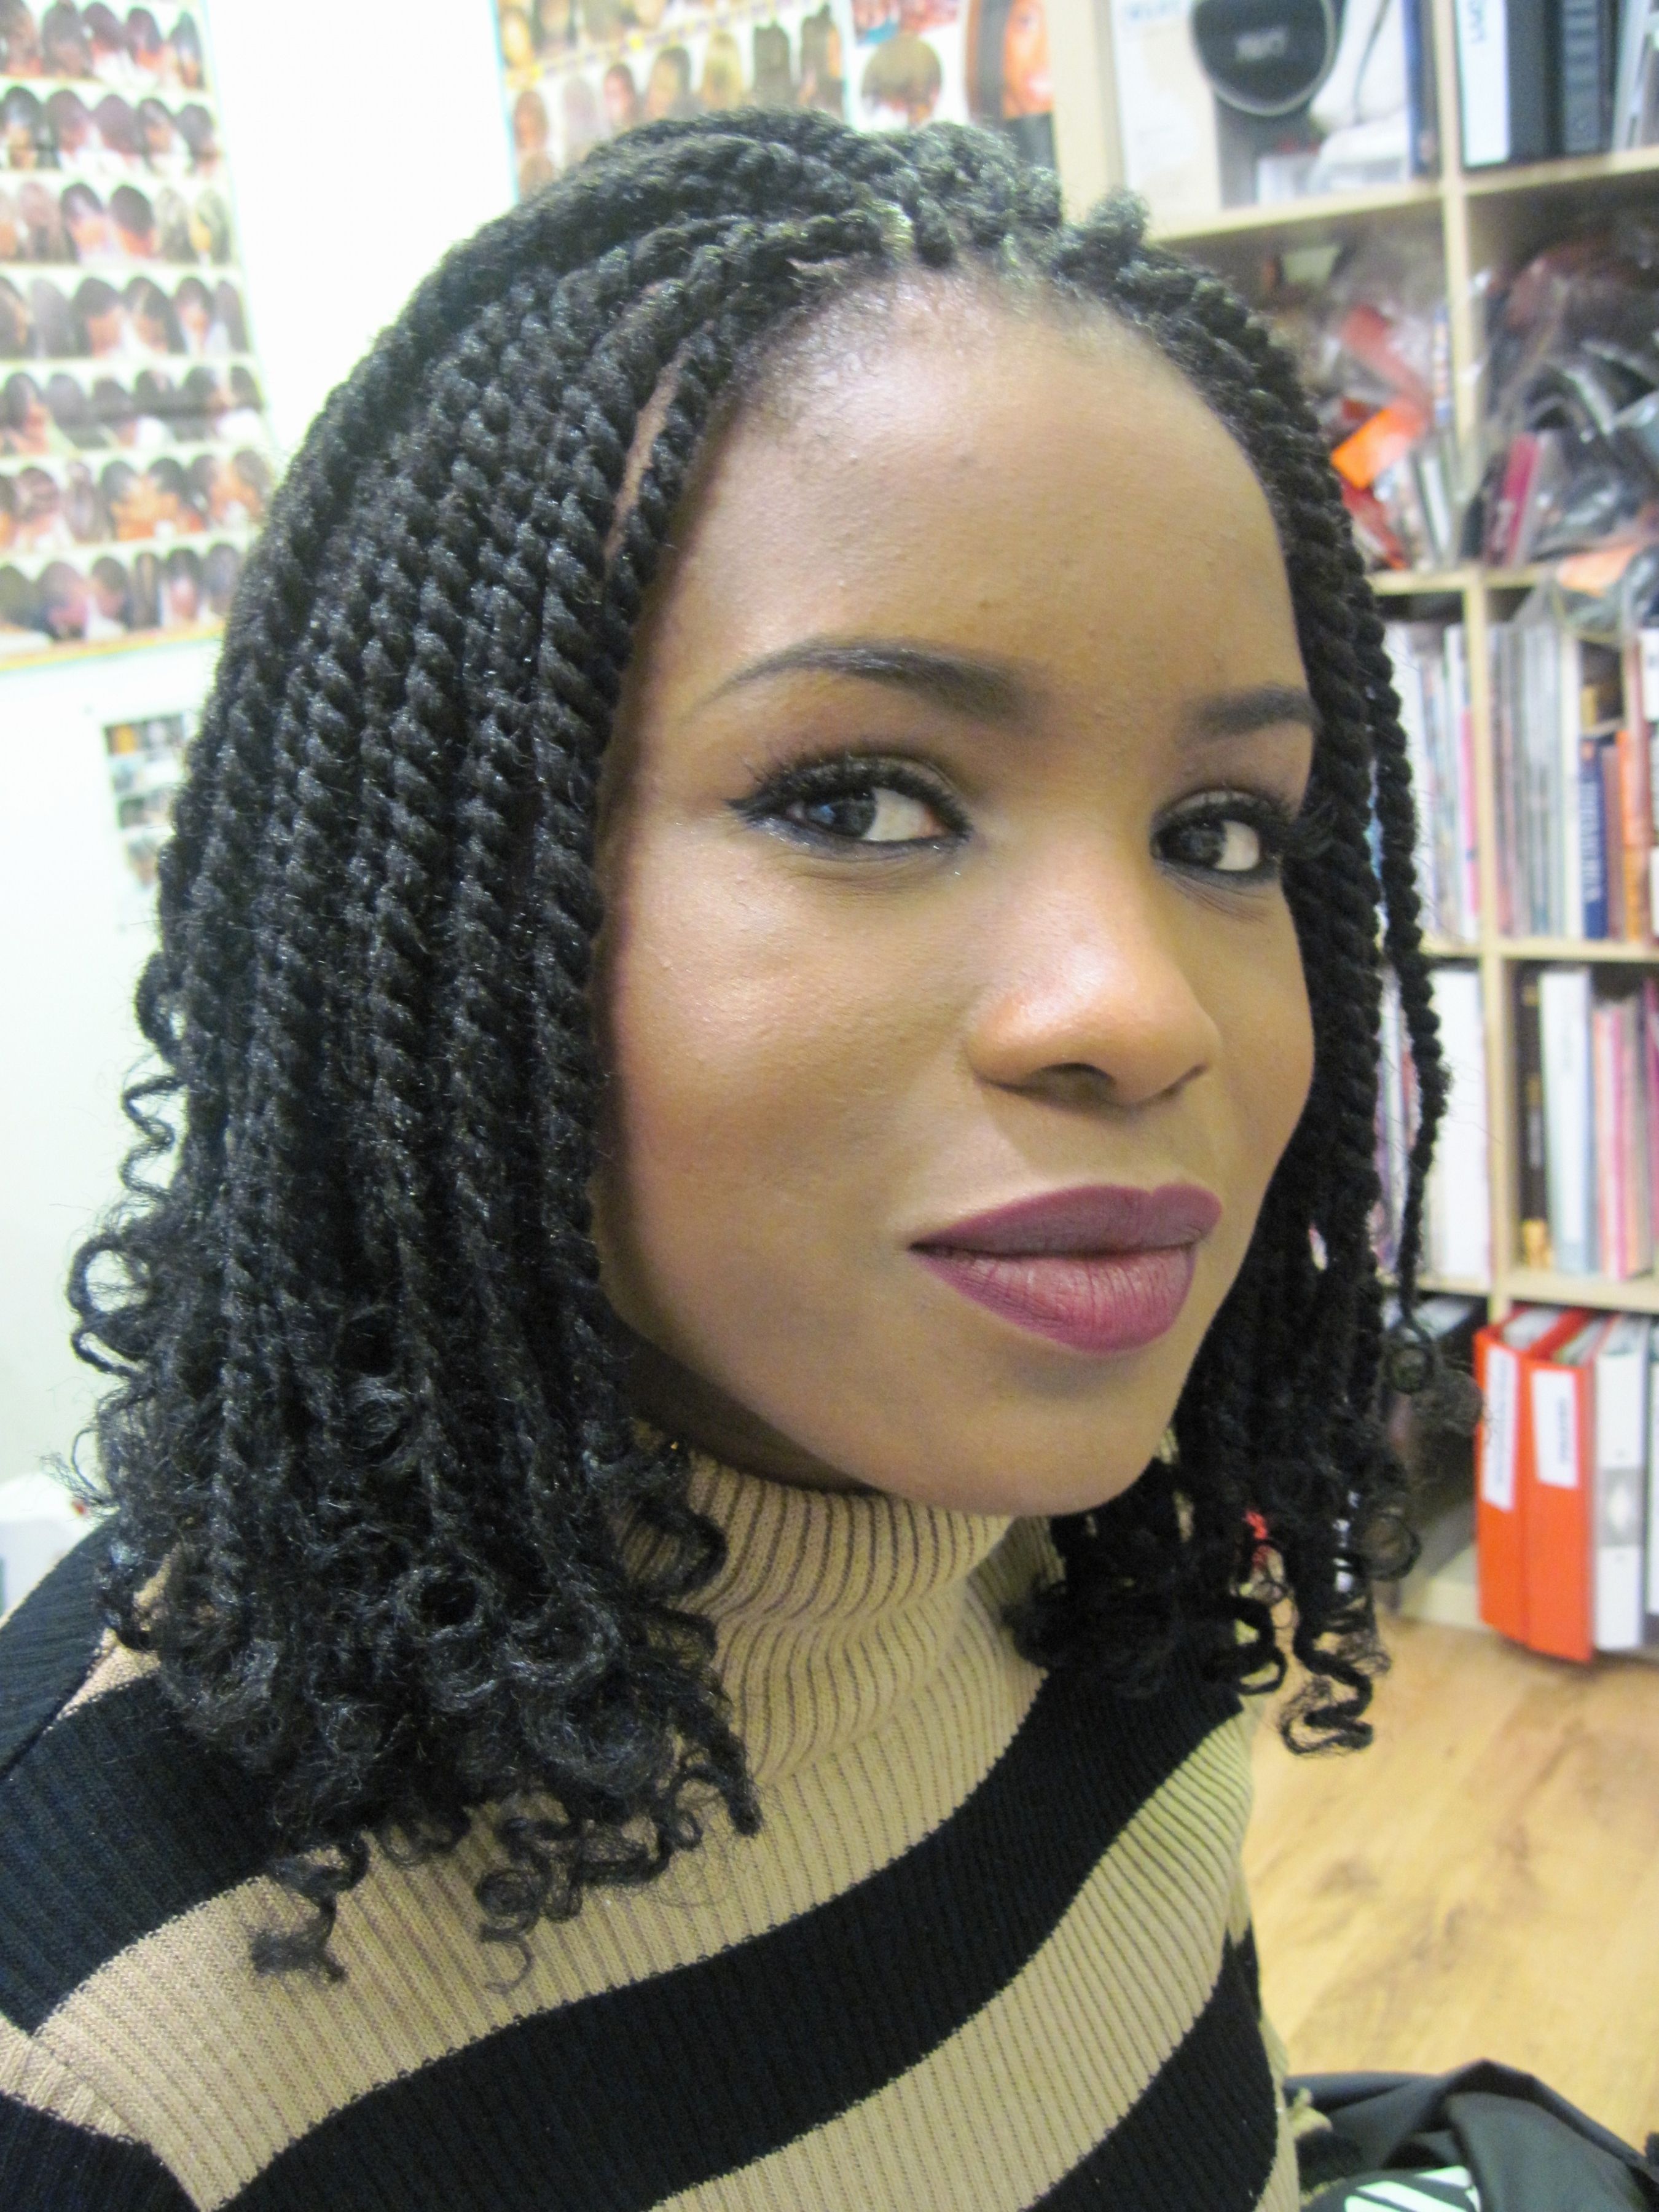 Most Current Kinky Braid Hairstyles Pertaining To Braid Hairstyles For Women Fresh Afro Twist Hairstyles For La S (View 8 of 15)